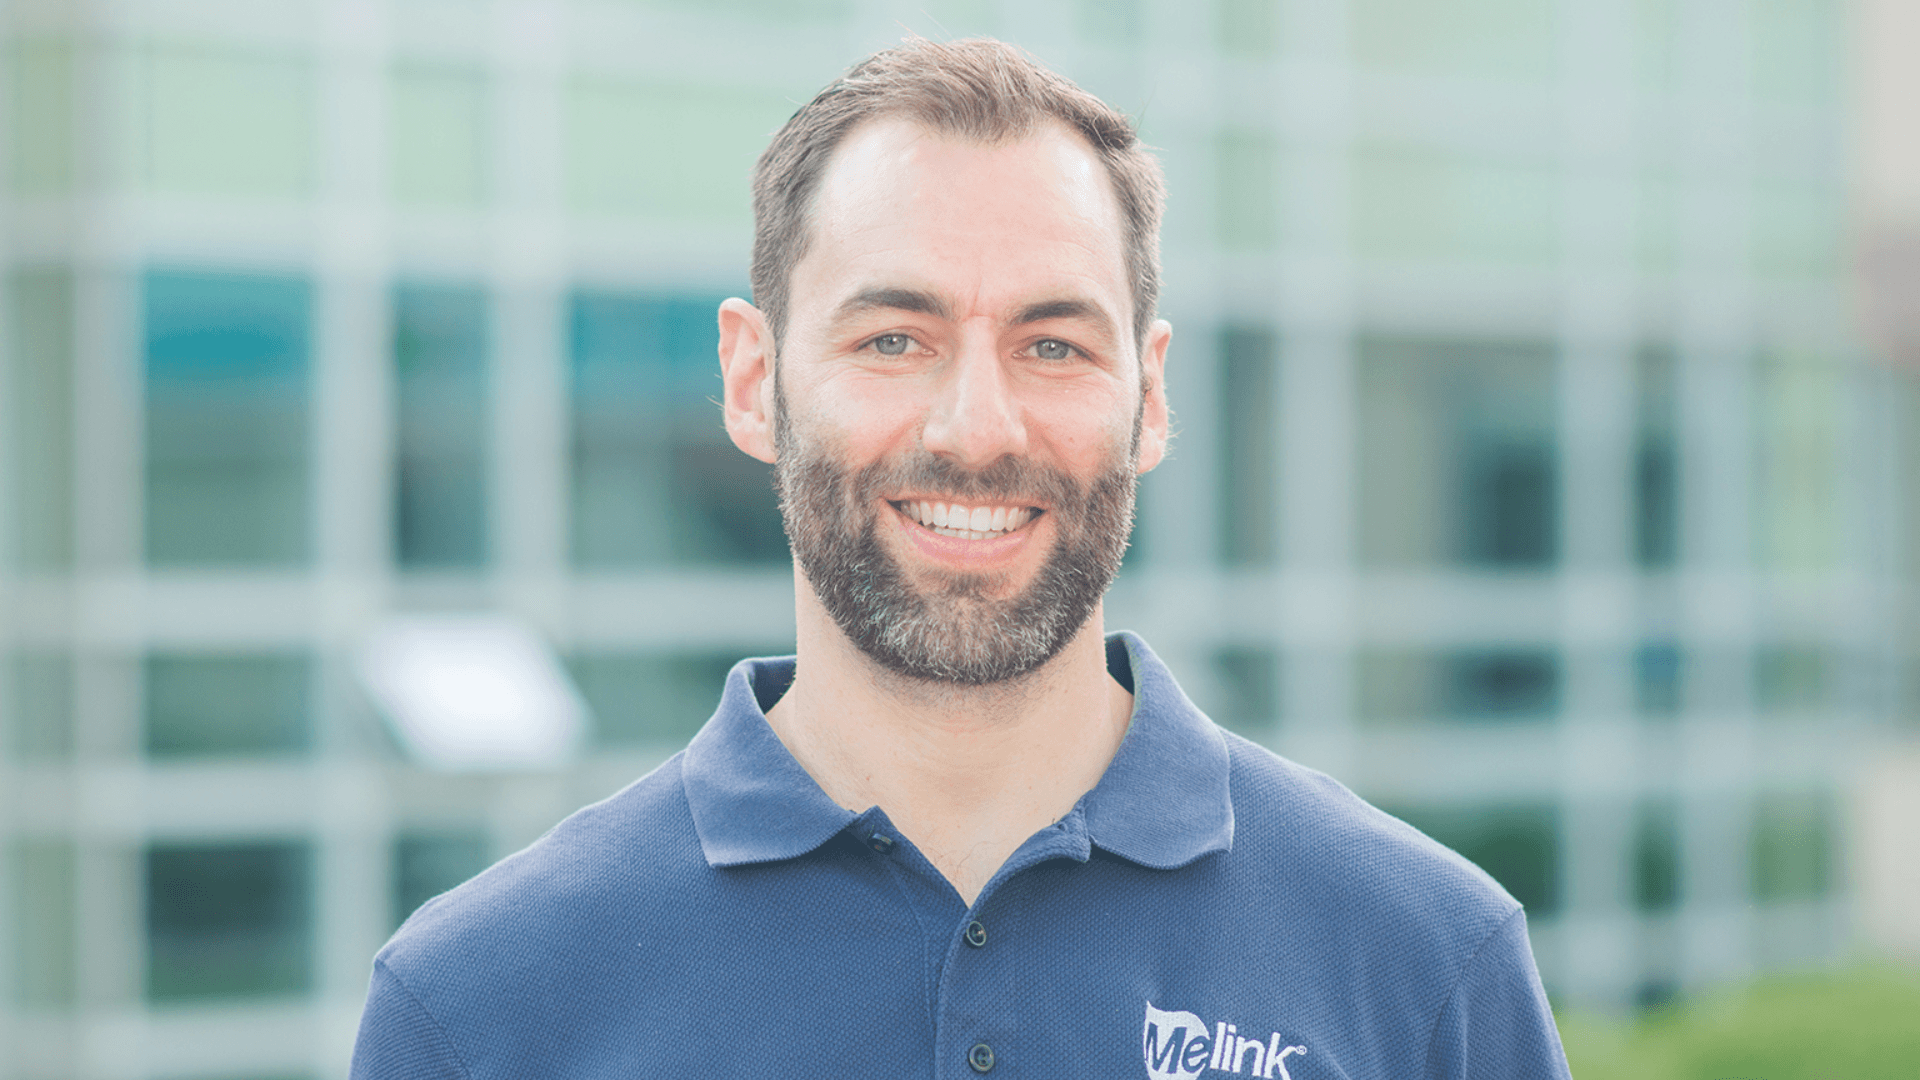 Meet Nathan Young, Solar & Geo Operations Manager